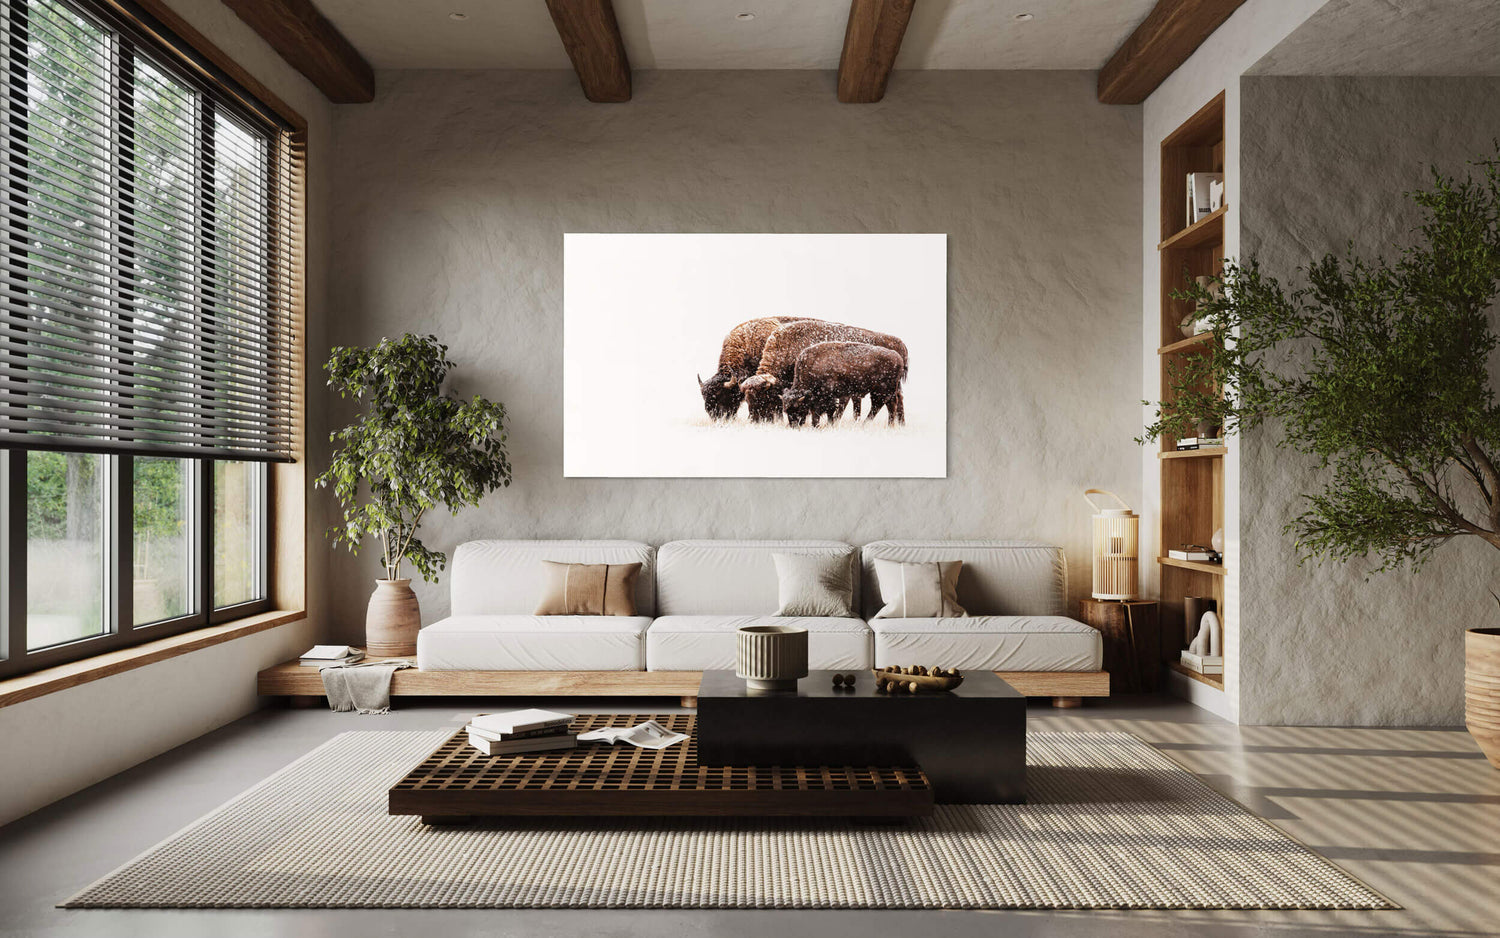 A picture of bison in the snow outside of Denver hangs in a living room.